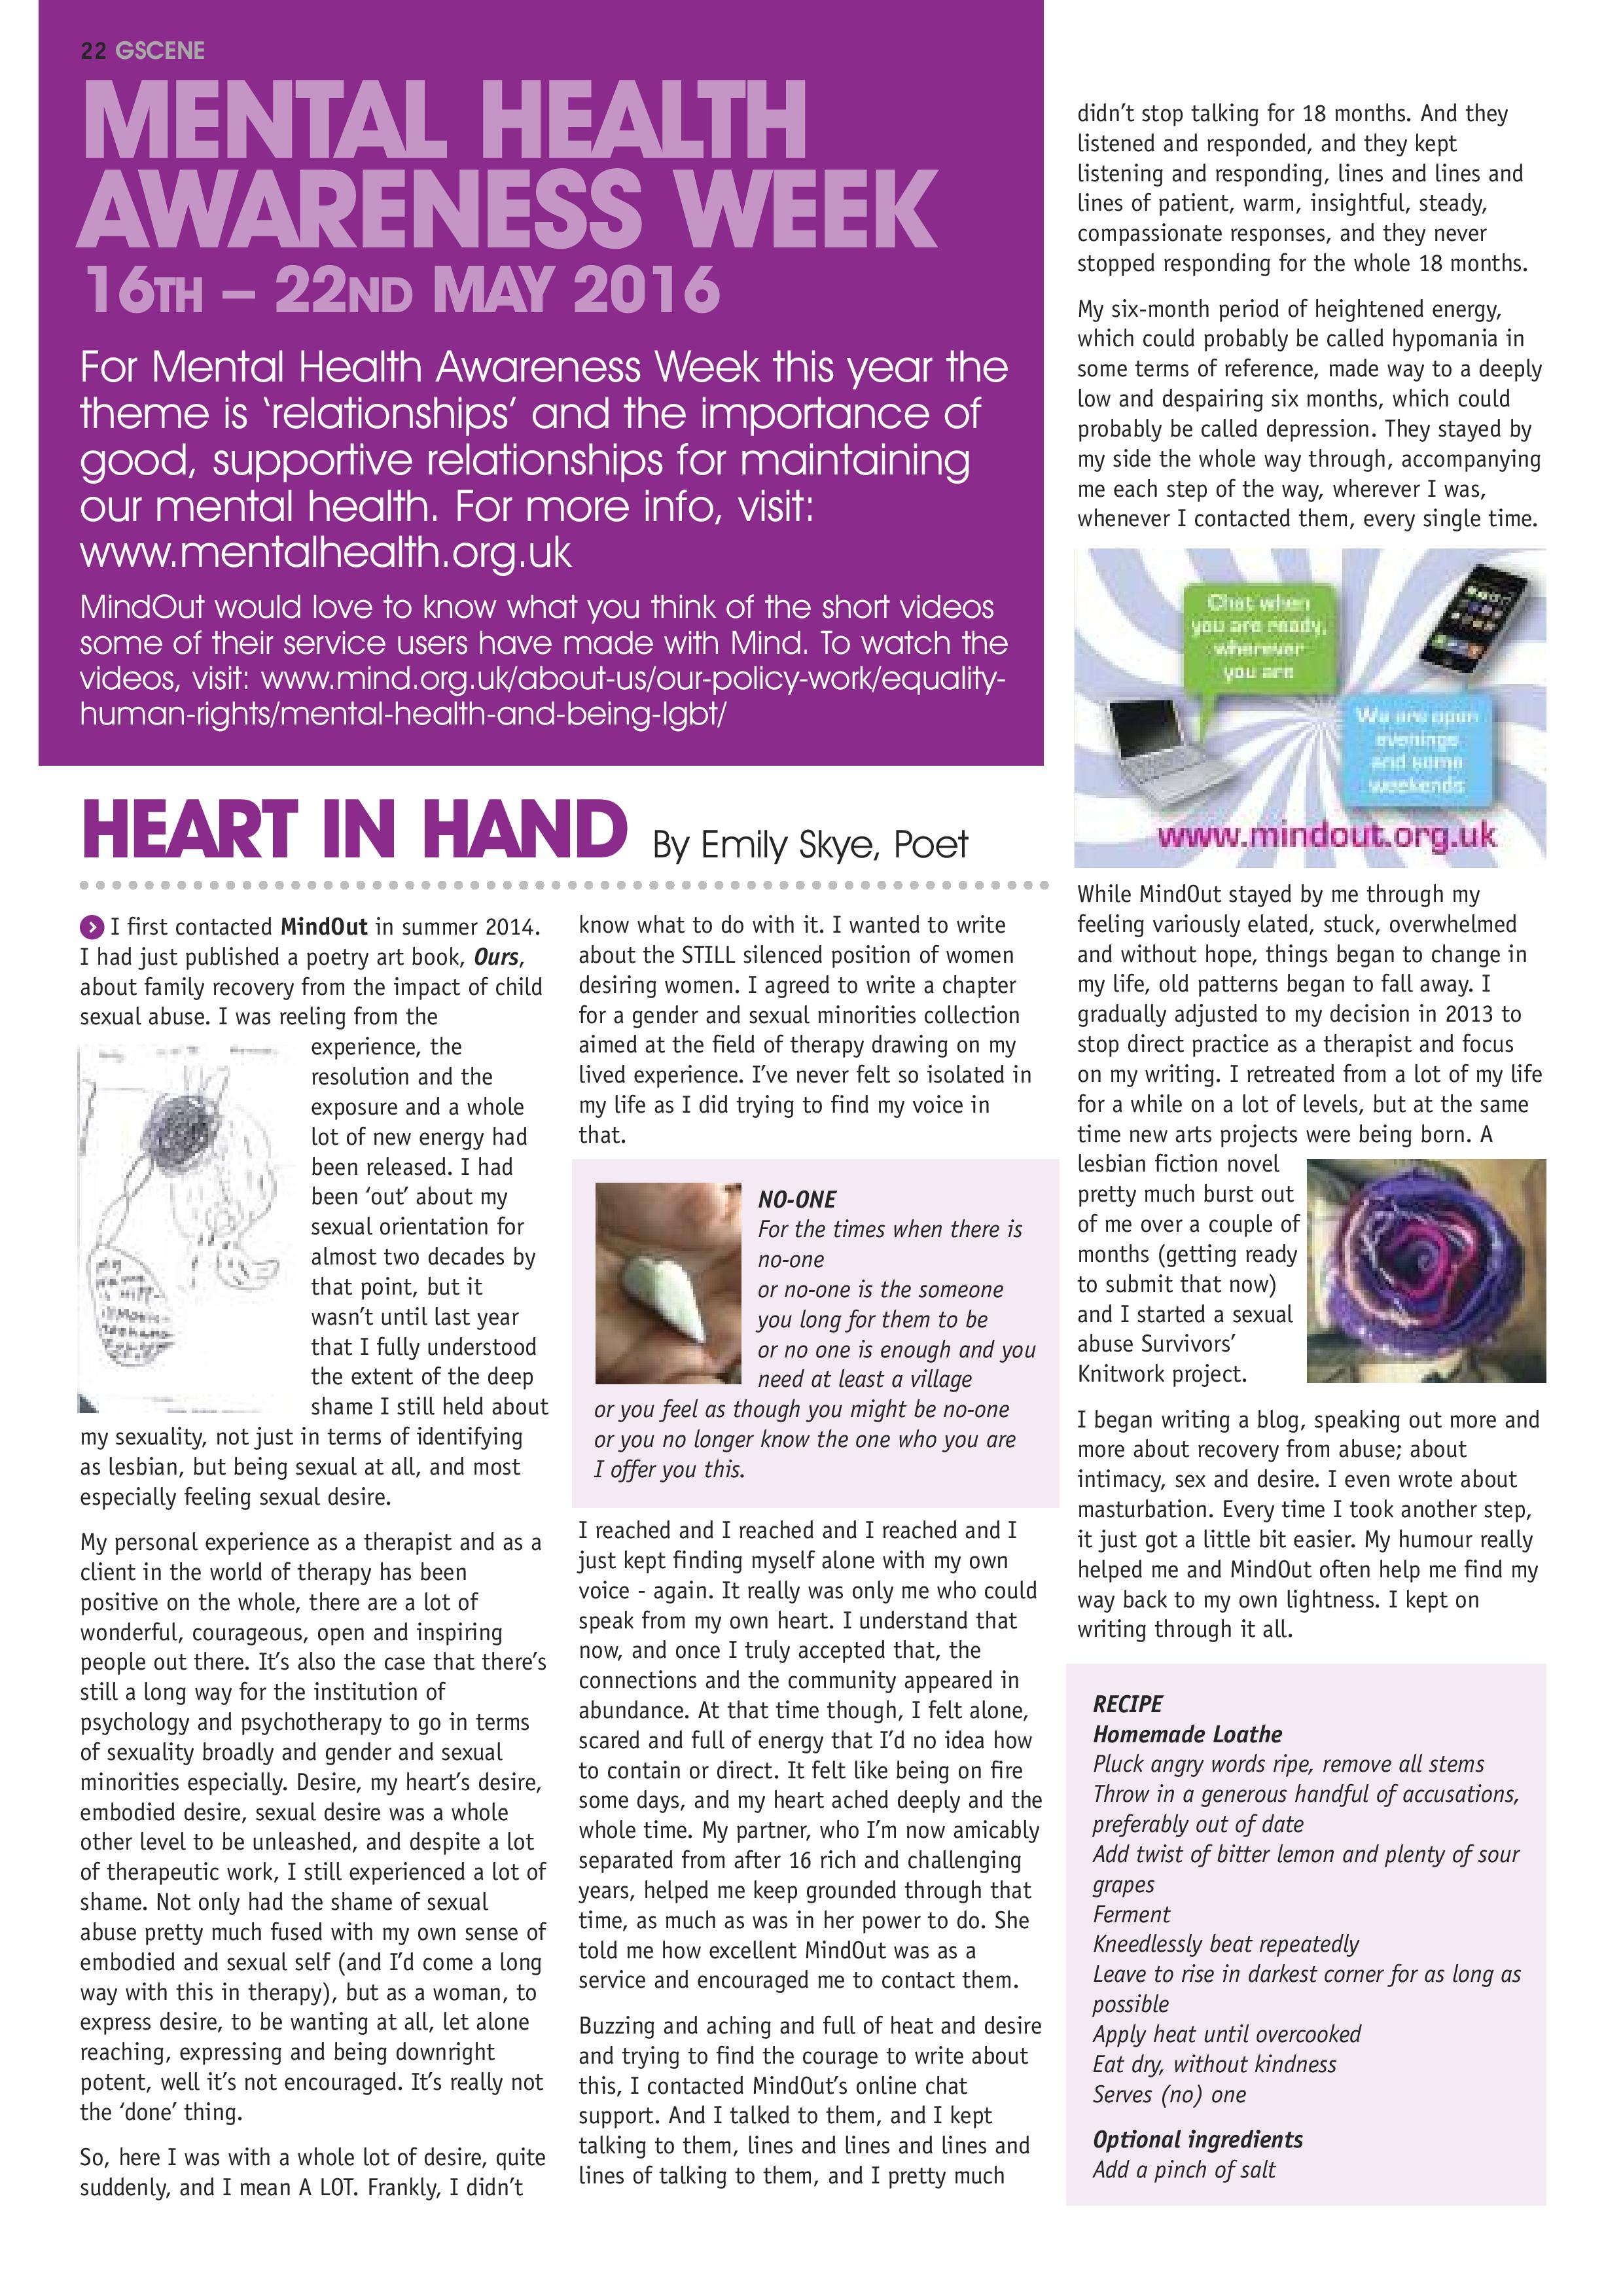 an image of a page from the magazine gscene showing emily skyes article